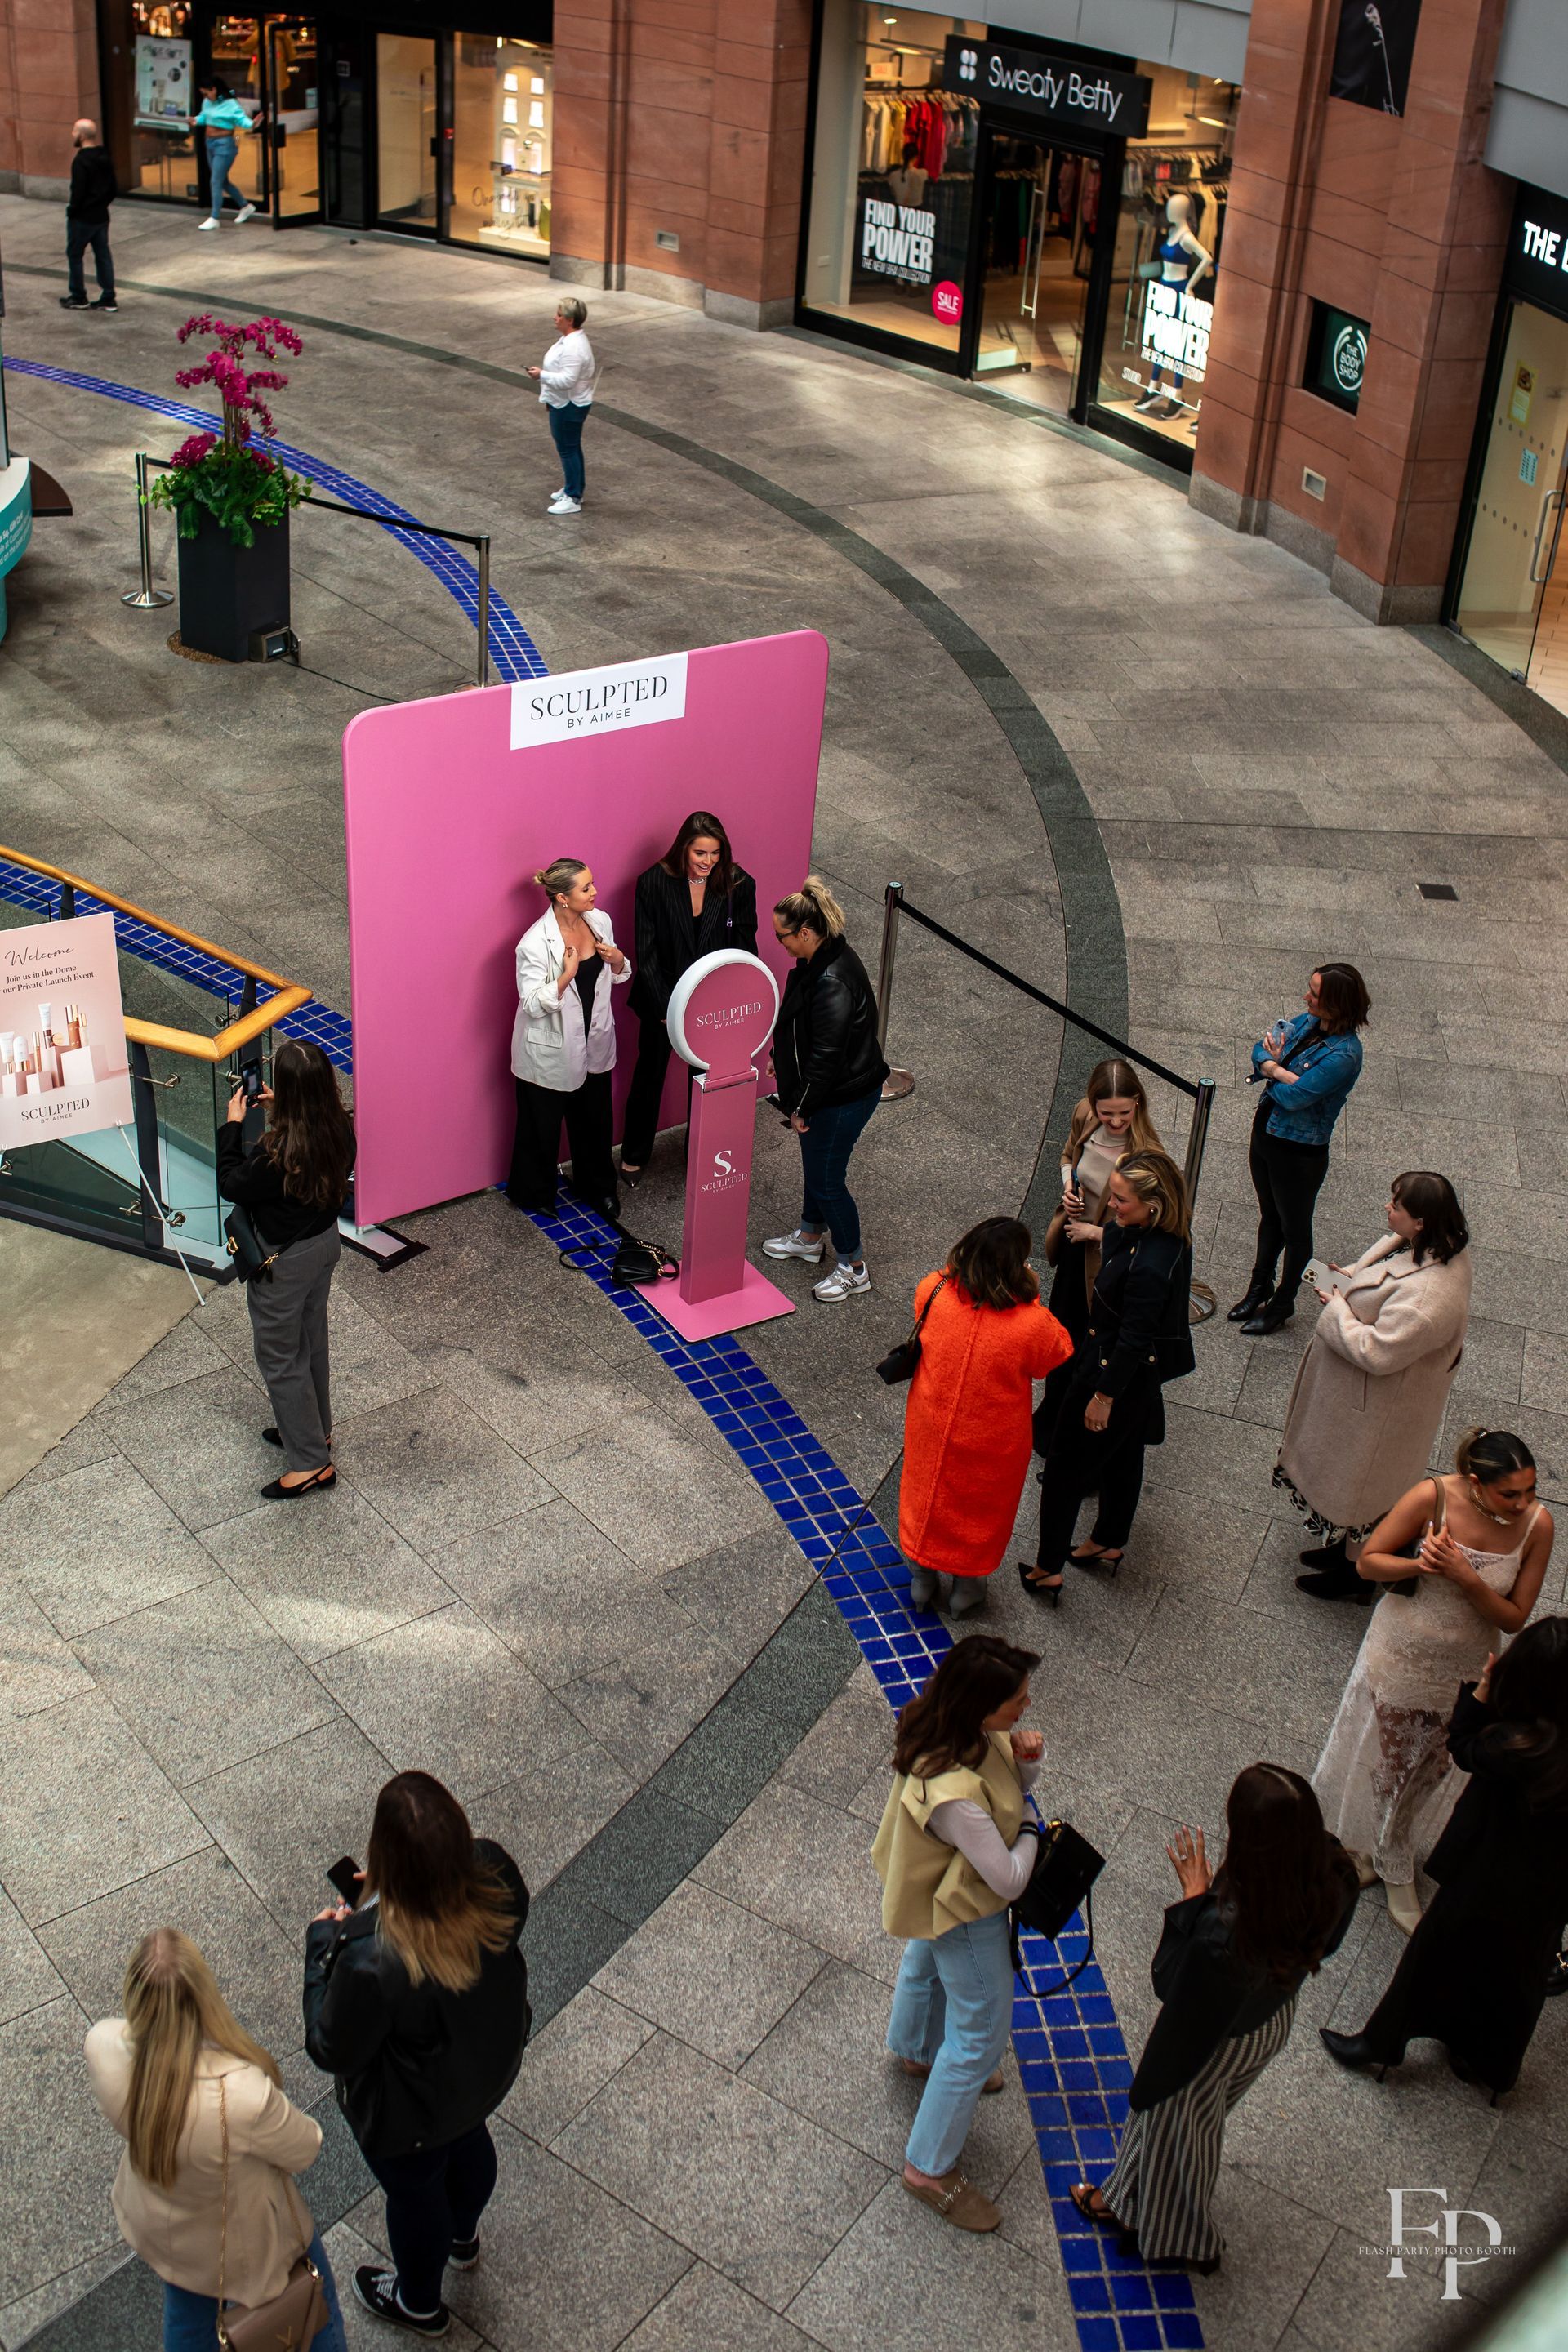 Adding a personalized touch to the Atlanta corporate activation with our Selfie Photo Booth.